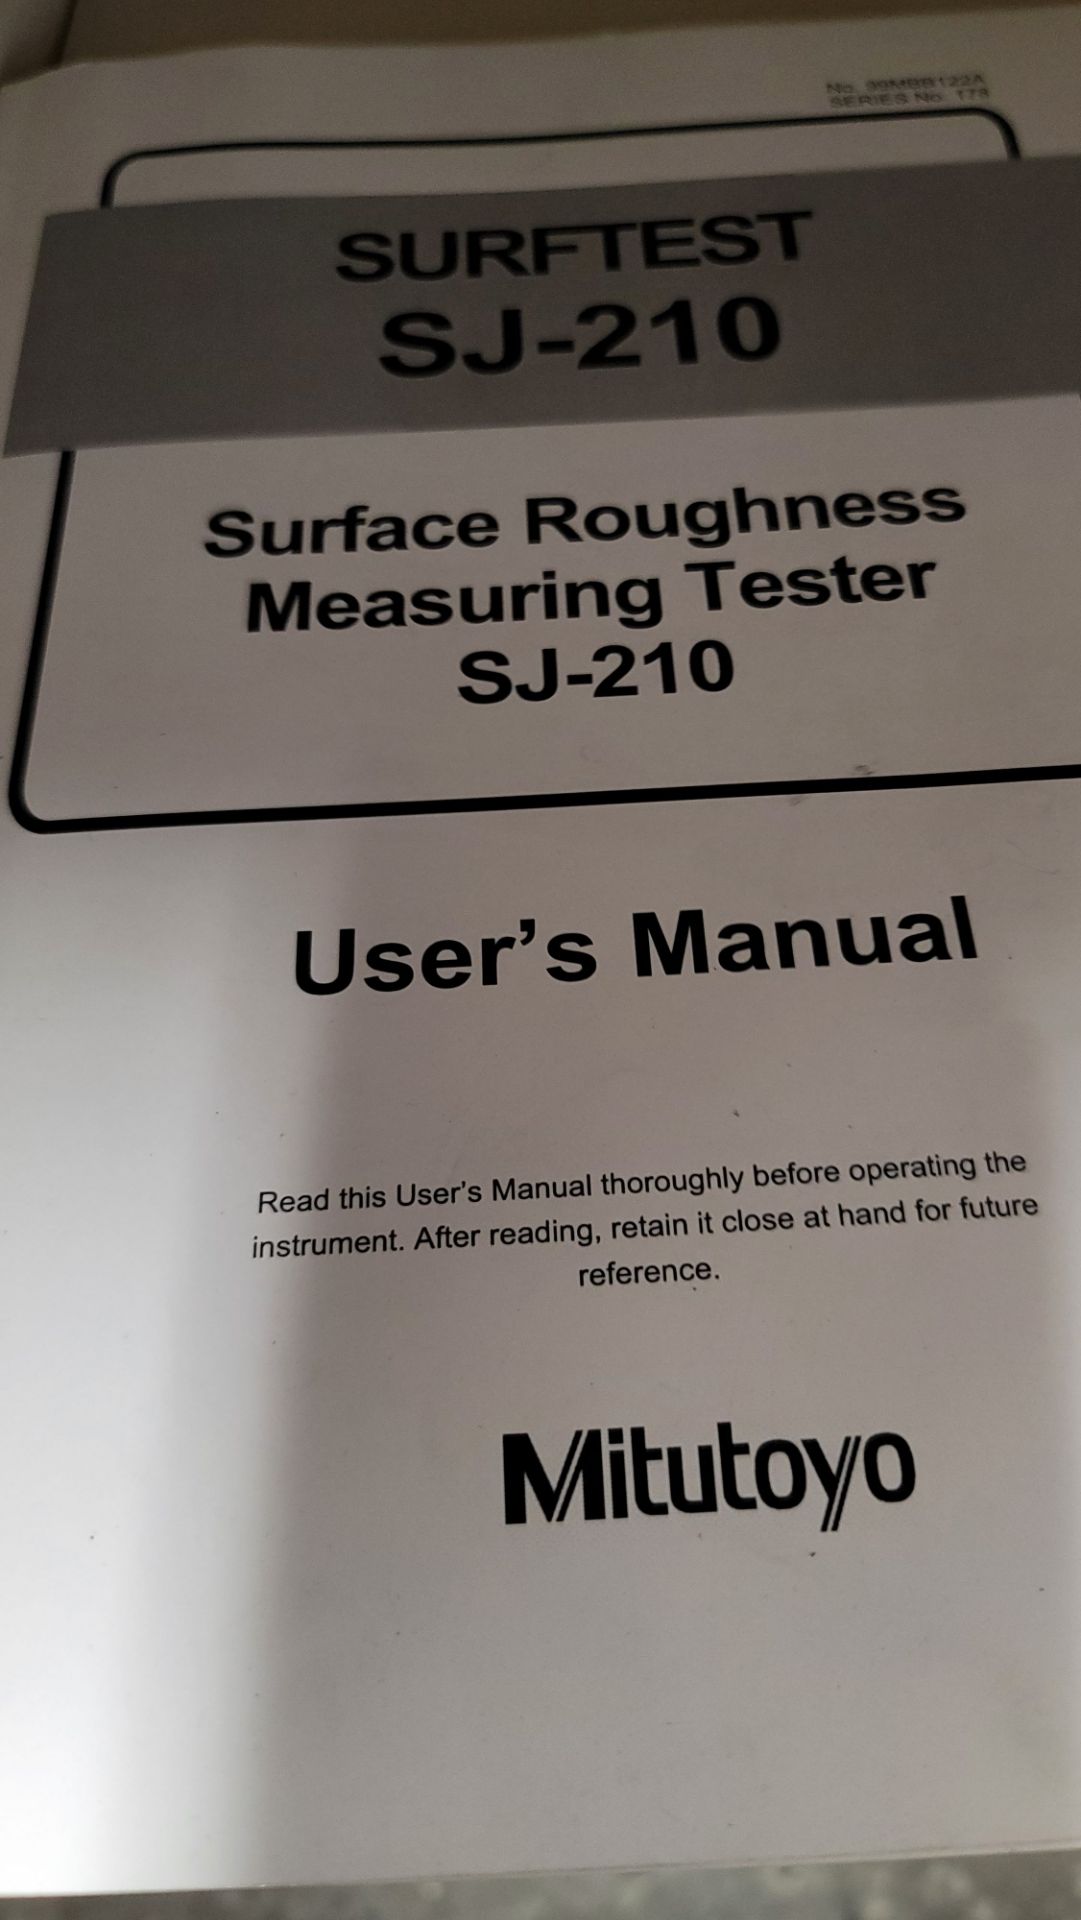 MITUTOYO SURFTEST SJ-210 SURFACE ROUGHNESS MEASURING TESTER - Image 2 of 2